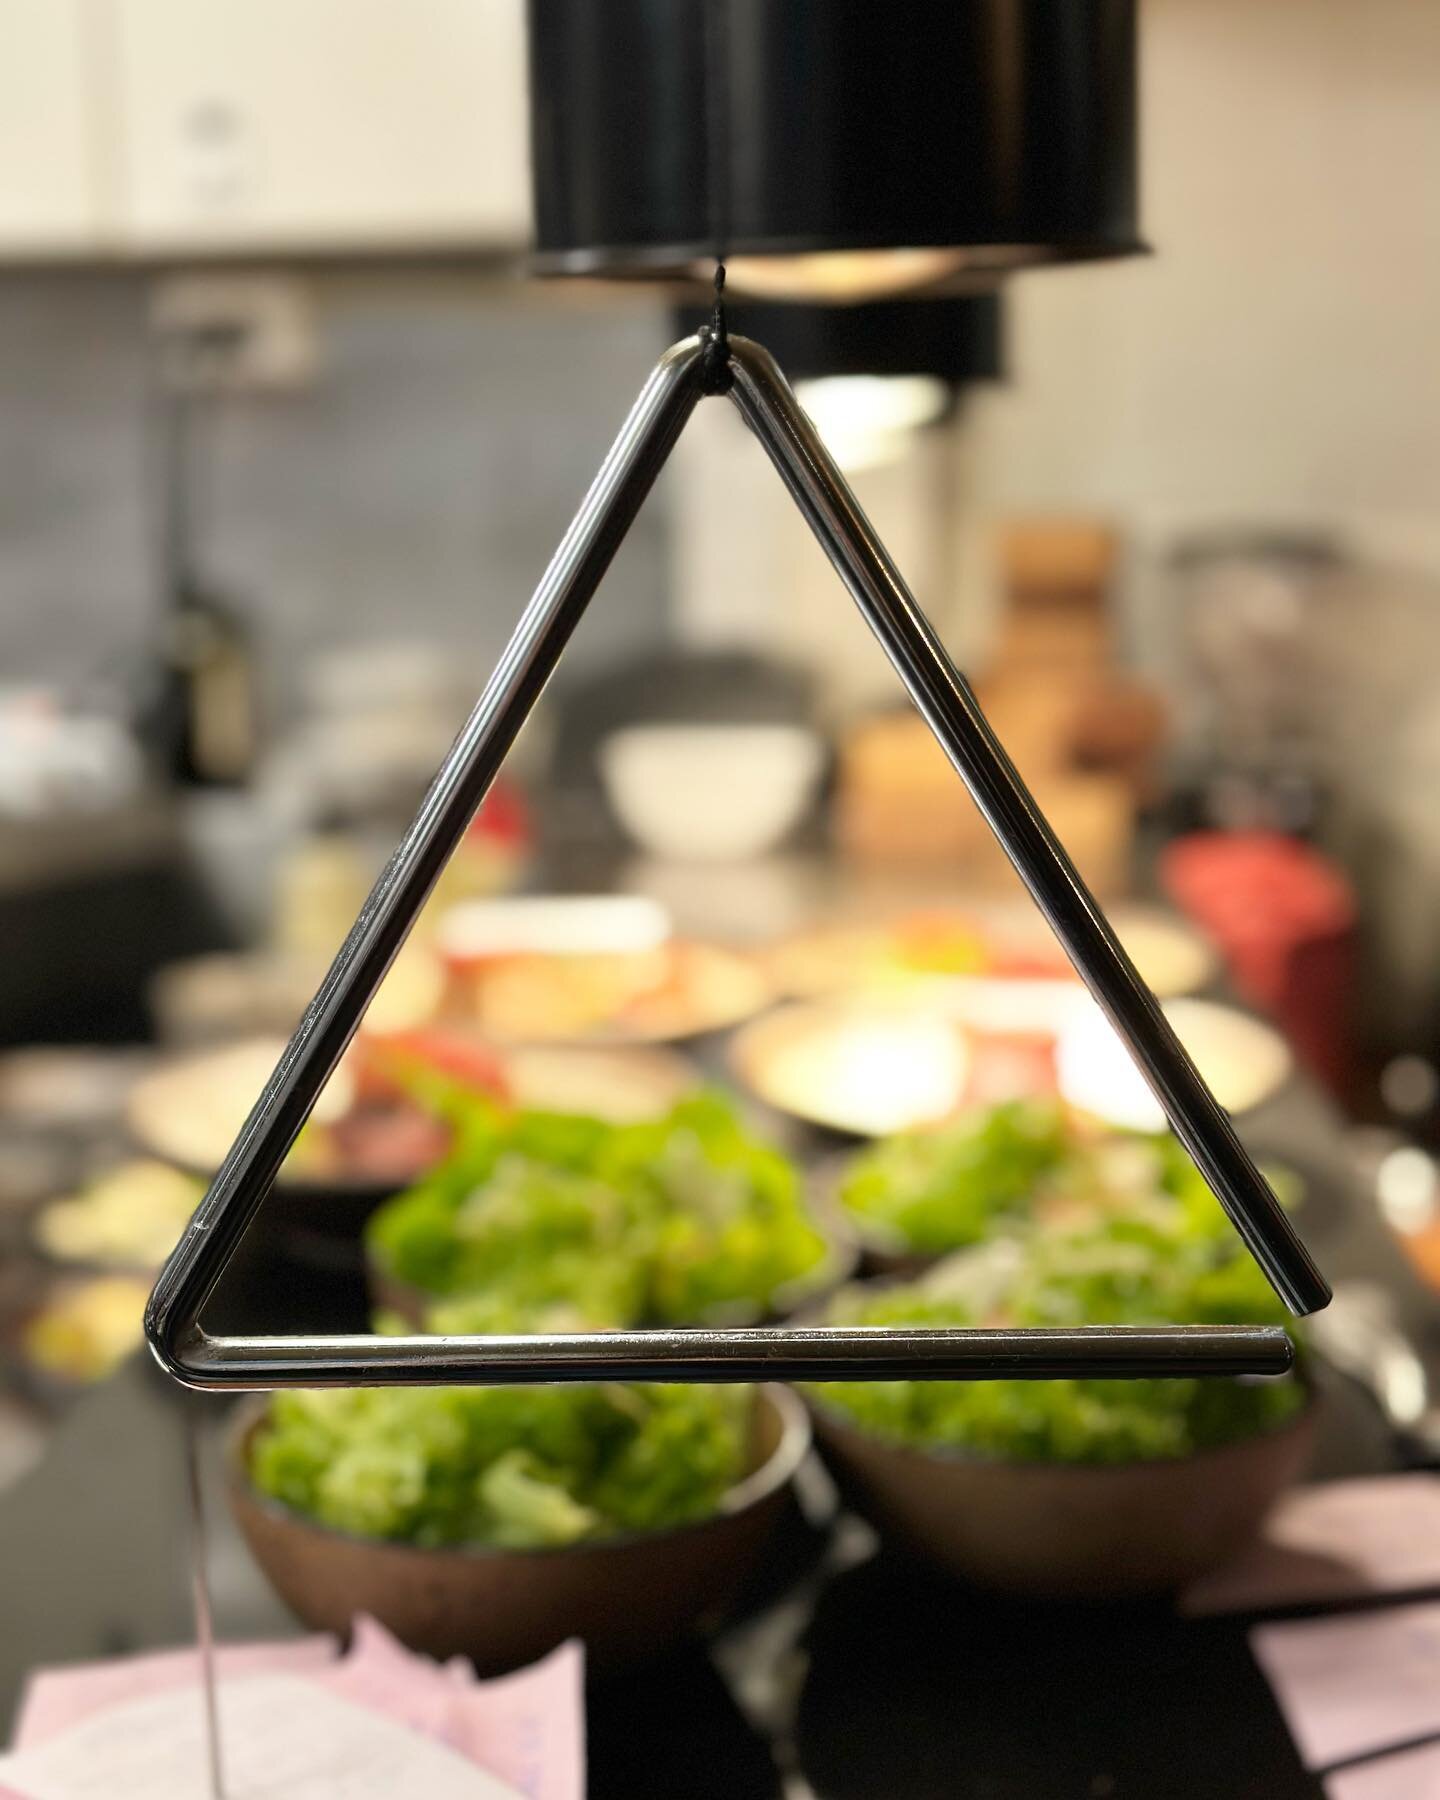 Ever worked in hospo &amp; heard the service bell in your sleep? 

We replaced it with a triangle at arc &amp; we&rsquo;ve never looked back 🔼